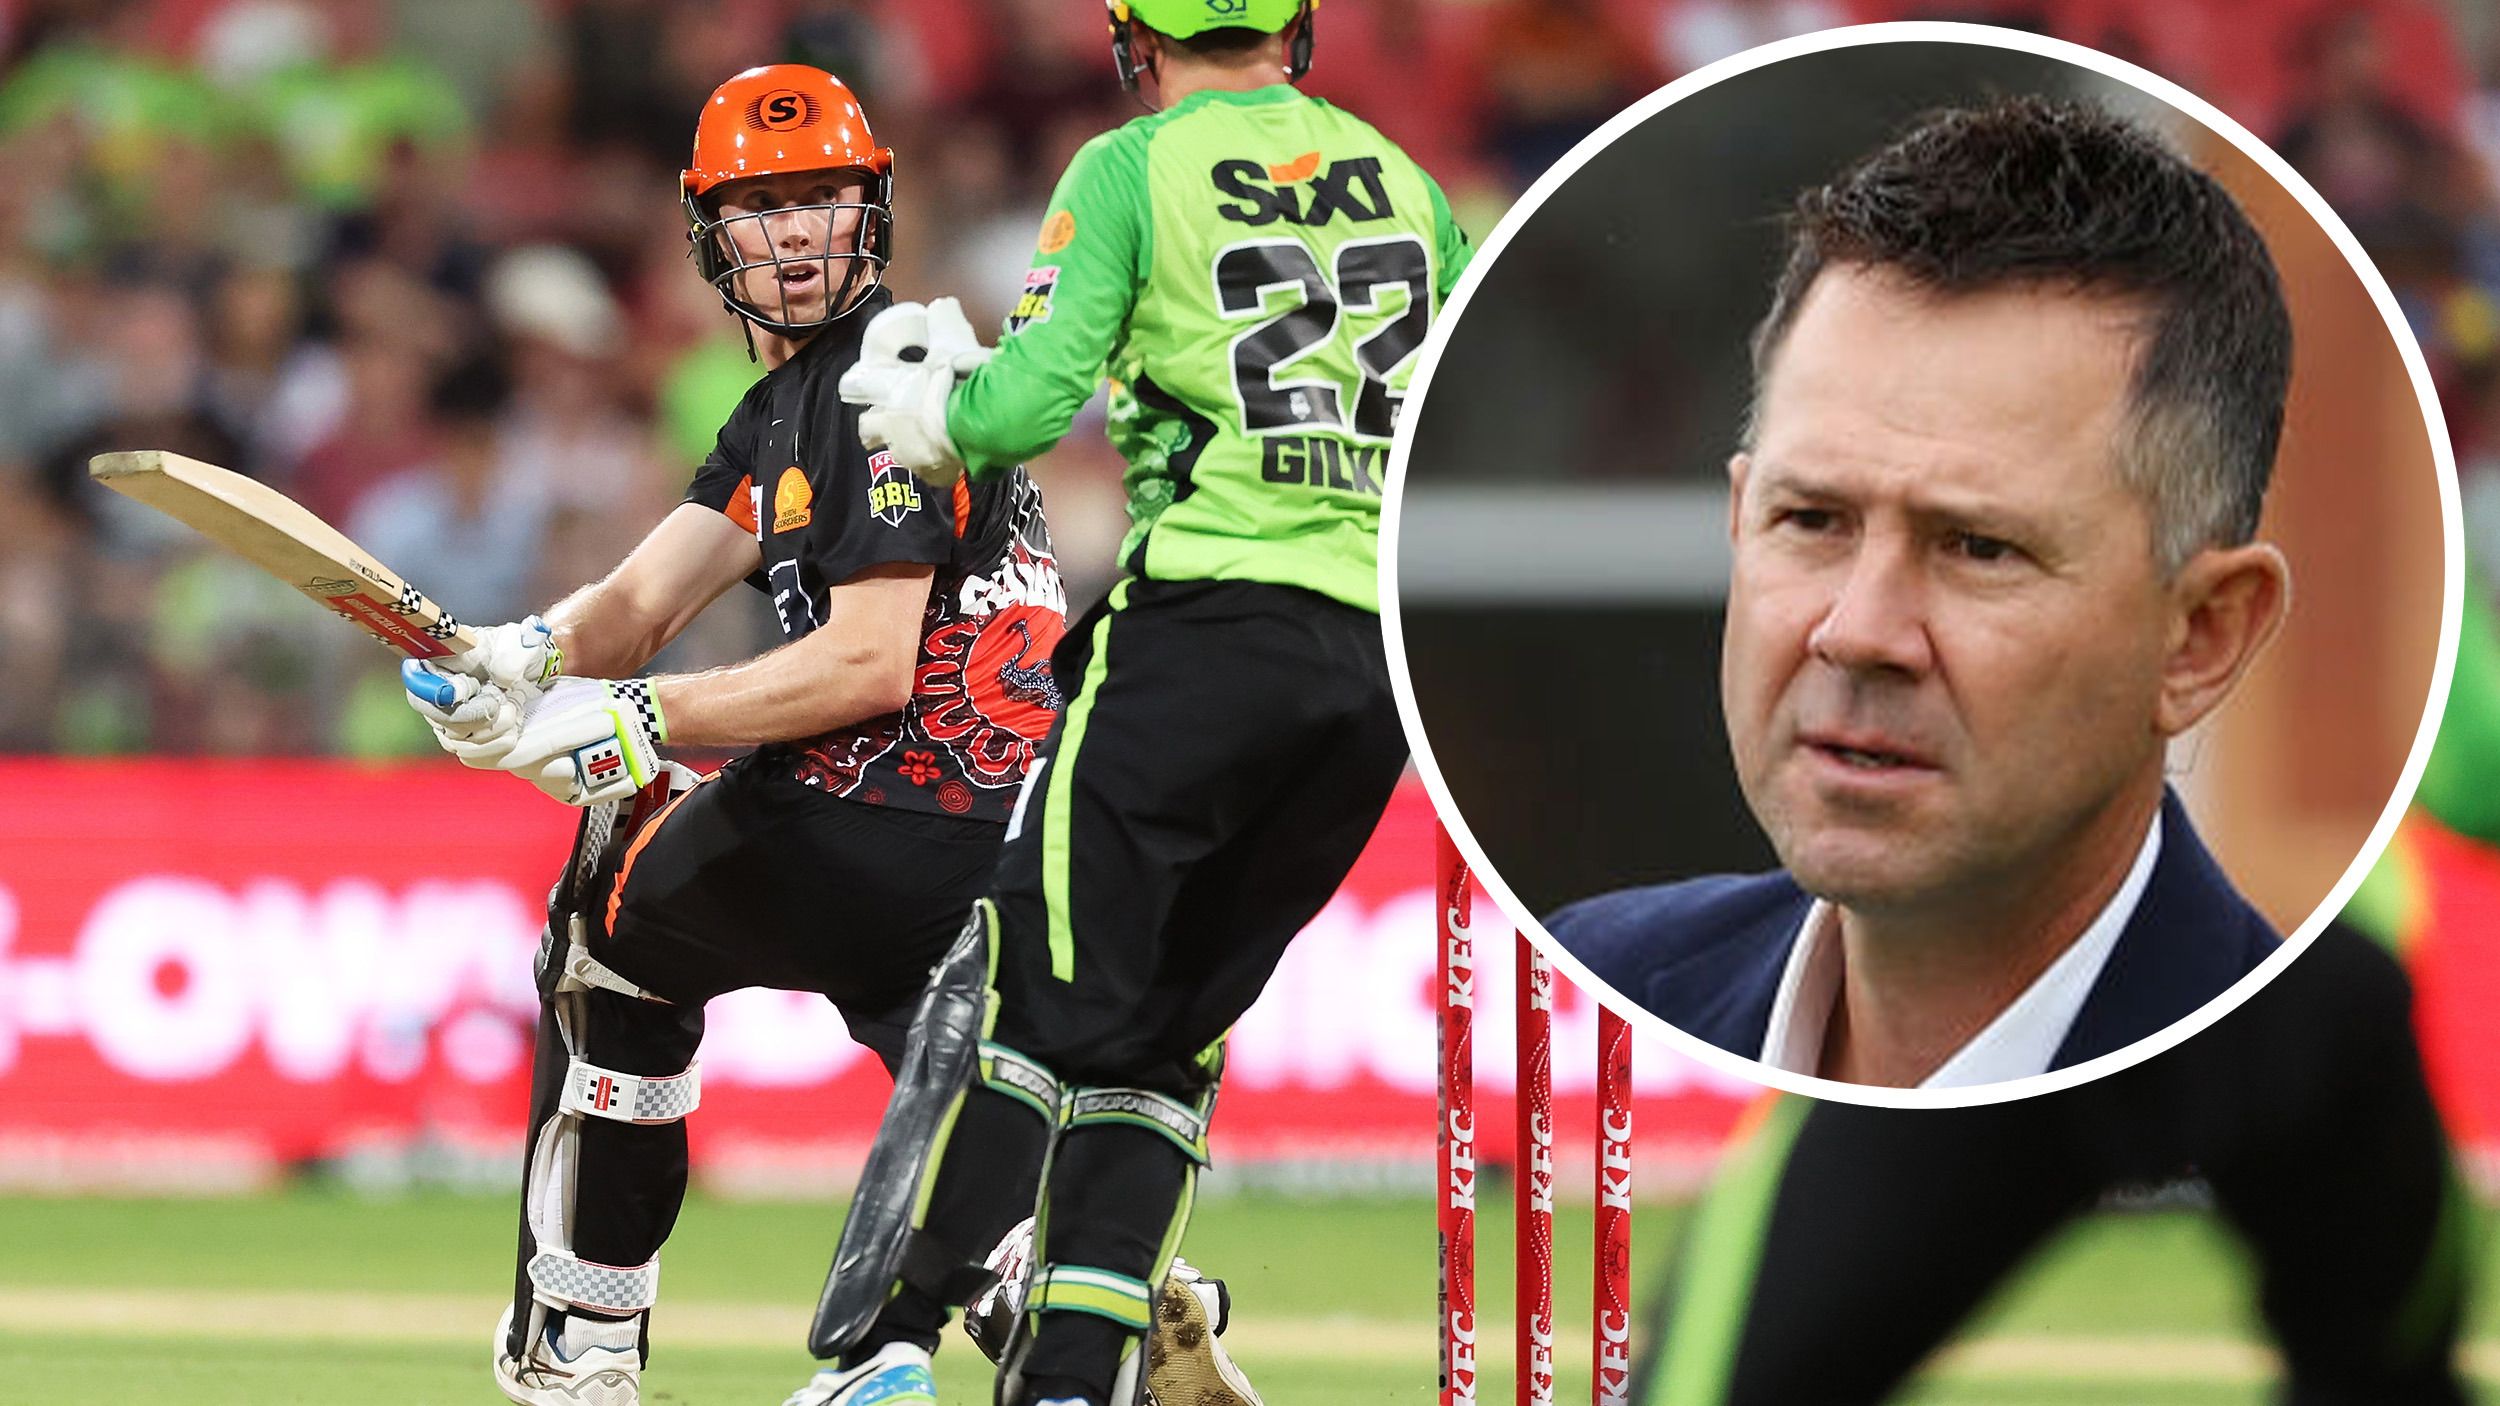 Cricket legend Ricky Ponting ripped into the BBL pitch in Sydney.